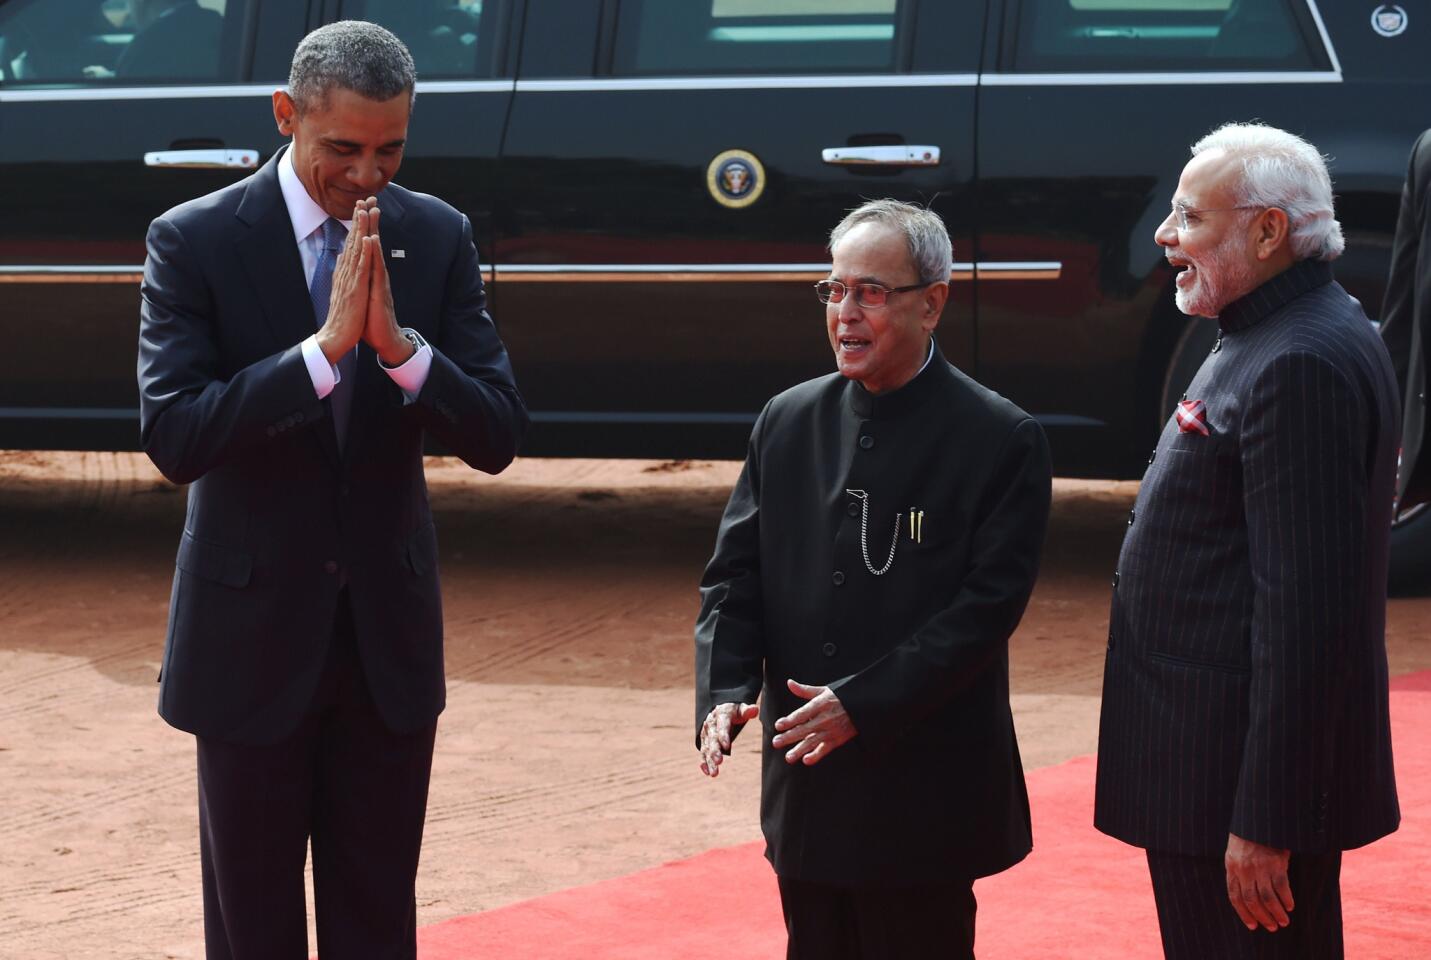 President Obama shares greetings with Indian President Pranab Mukherjee, center, and Prime Minister Narendra Modi at the presidential palace in New Delhi.